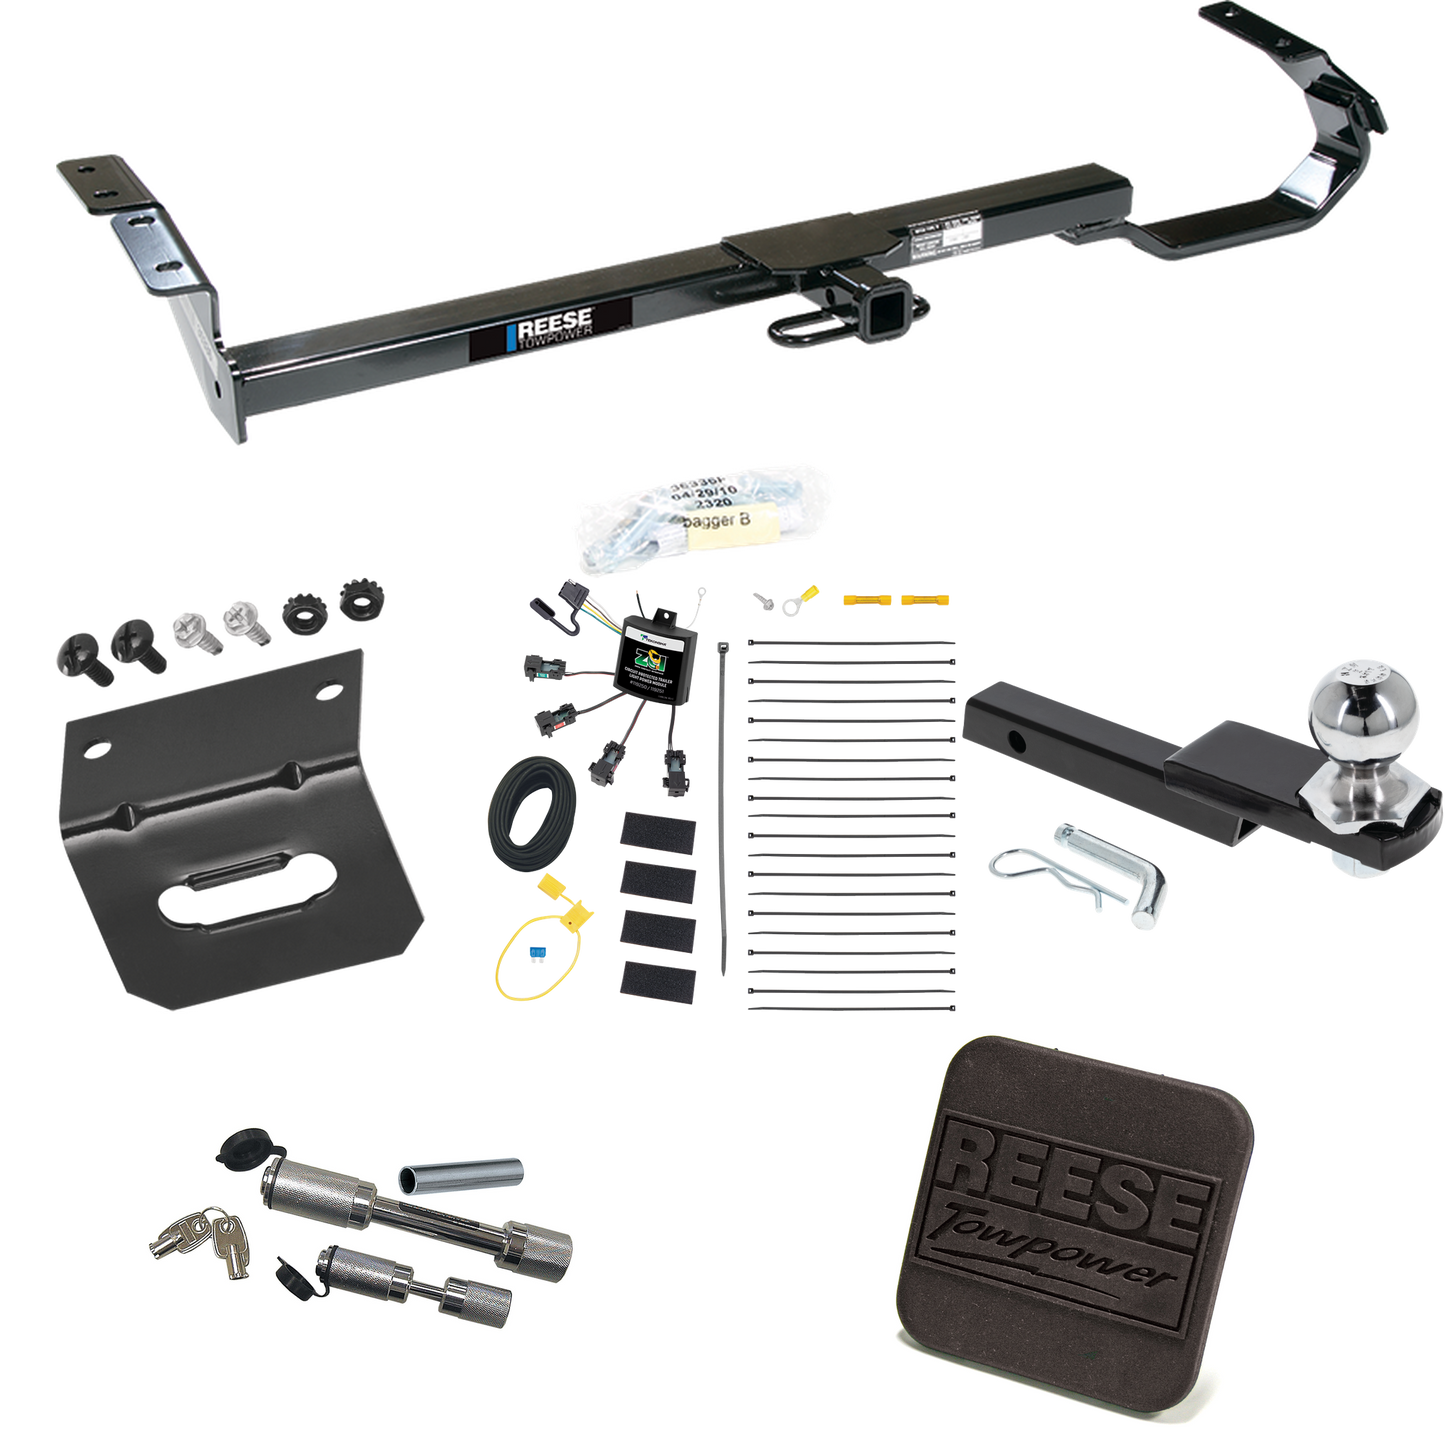 Fits 1992-1996 Toyota Camry Trailer Hitch Tow PKG w/ 4-Flat Zero Contact "No Splice" Wiring Harness + Interlock Starter Kit w/ 2" Ball 1-1/4" Drop 3/4" Rise + Wiring Bracket + Hitch Cover + Dual Hitch & Coupler Locks By Reese Towpower